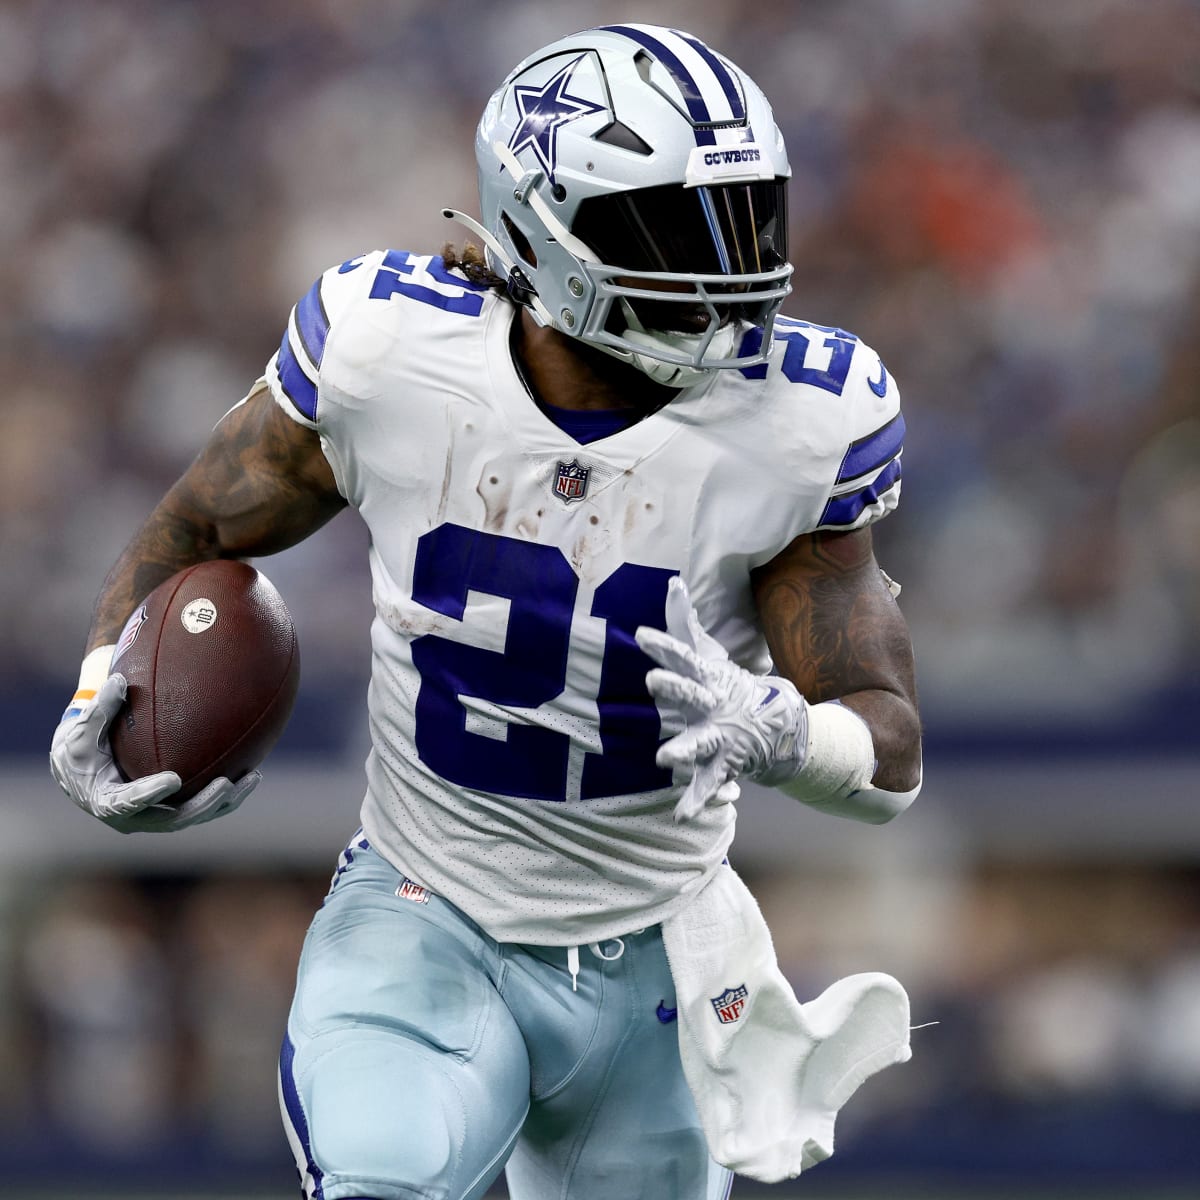 Cowboys are having issues in the red zone with Ezekiel Elliott